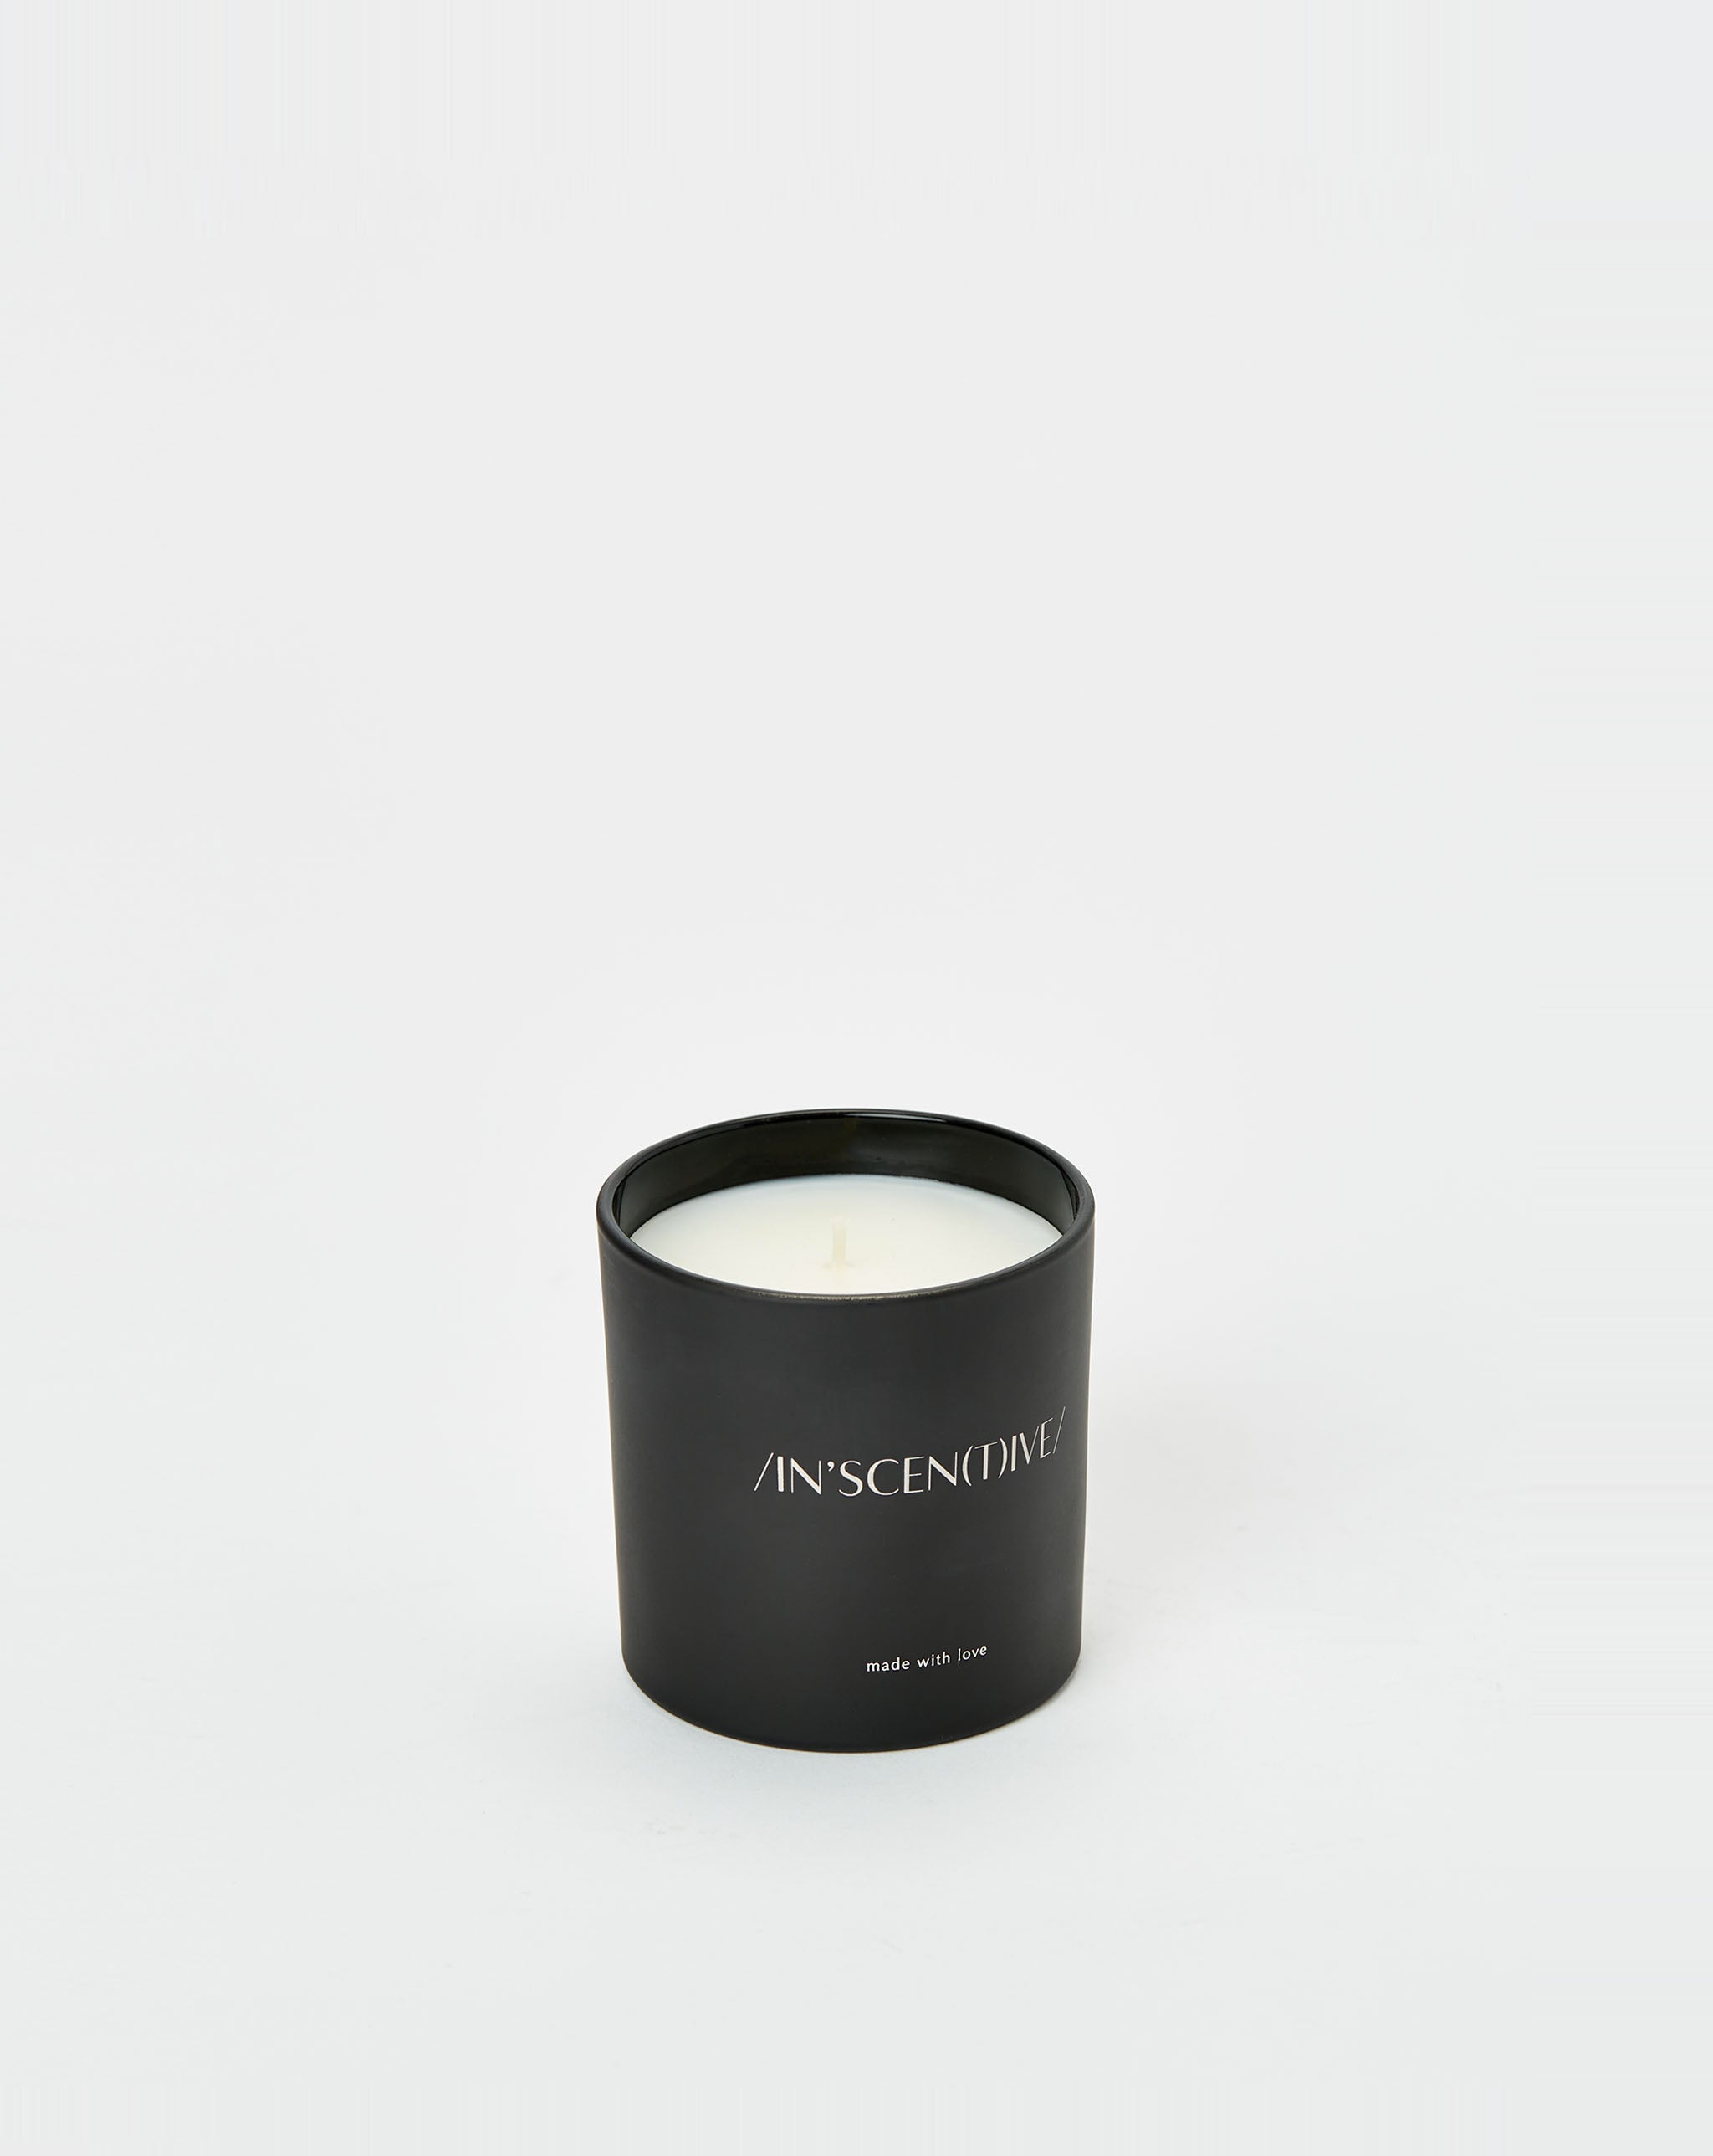 /IN'SCEN(T)IVE/ Rooted Candle  - Cheap Erlebniswelt-fliegenfischen Jordan outlet